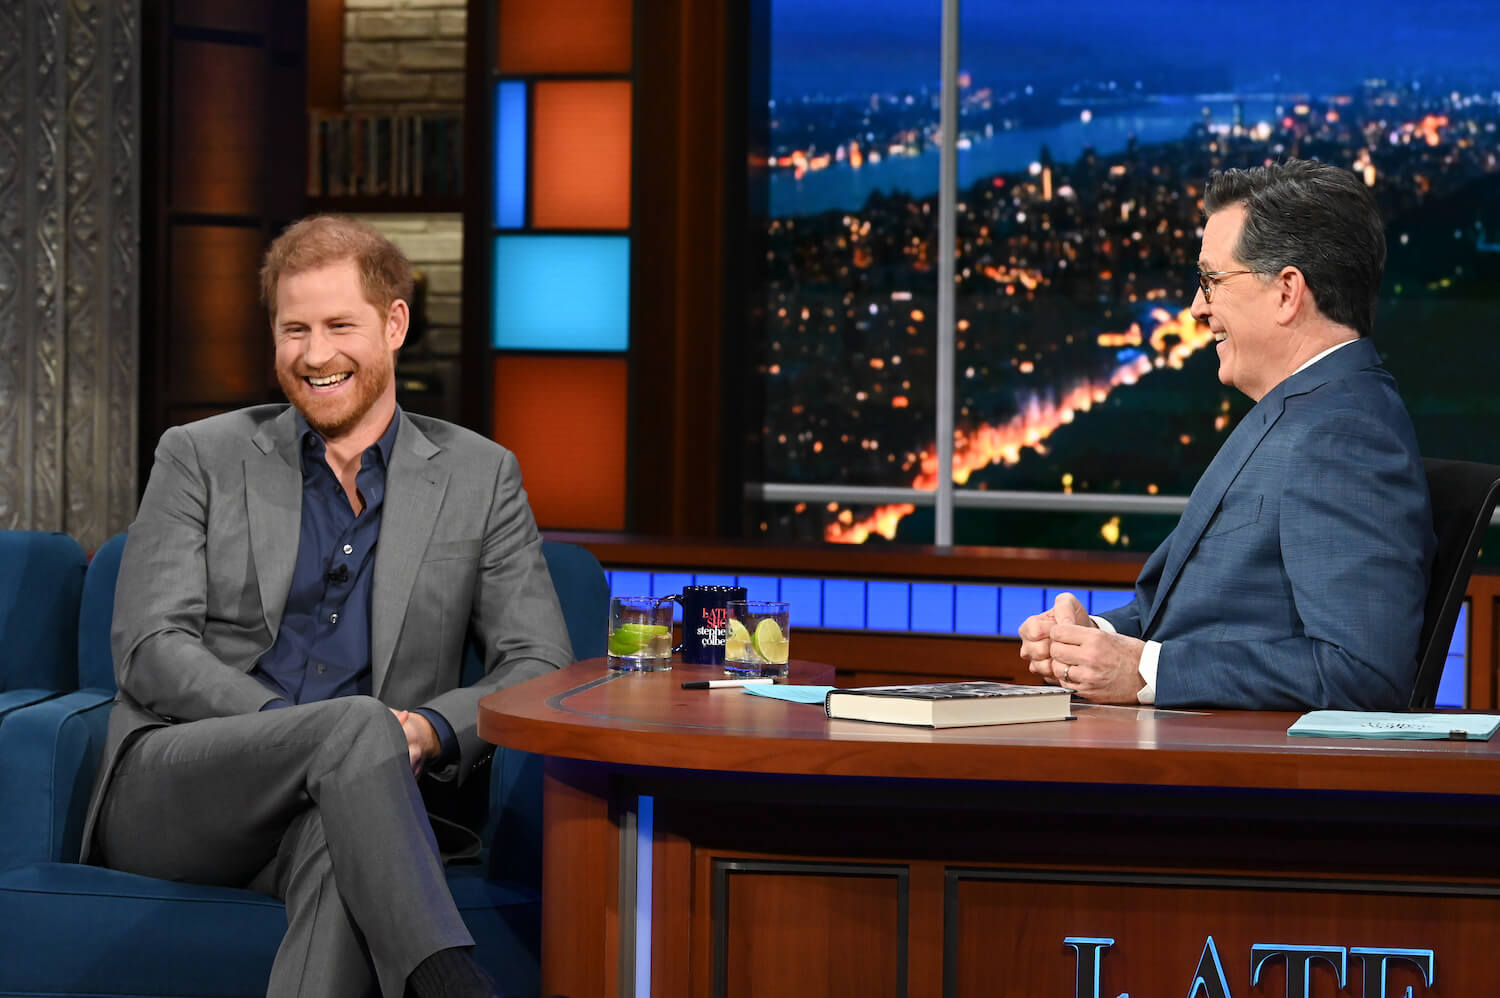 Prince Harry Was ‘On Top of His Game’ During Late Night Talk Show Appearance, Body Language Expert Says